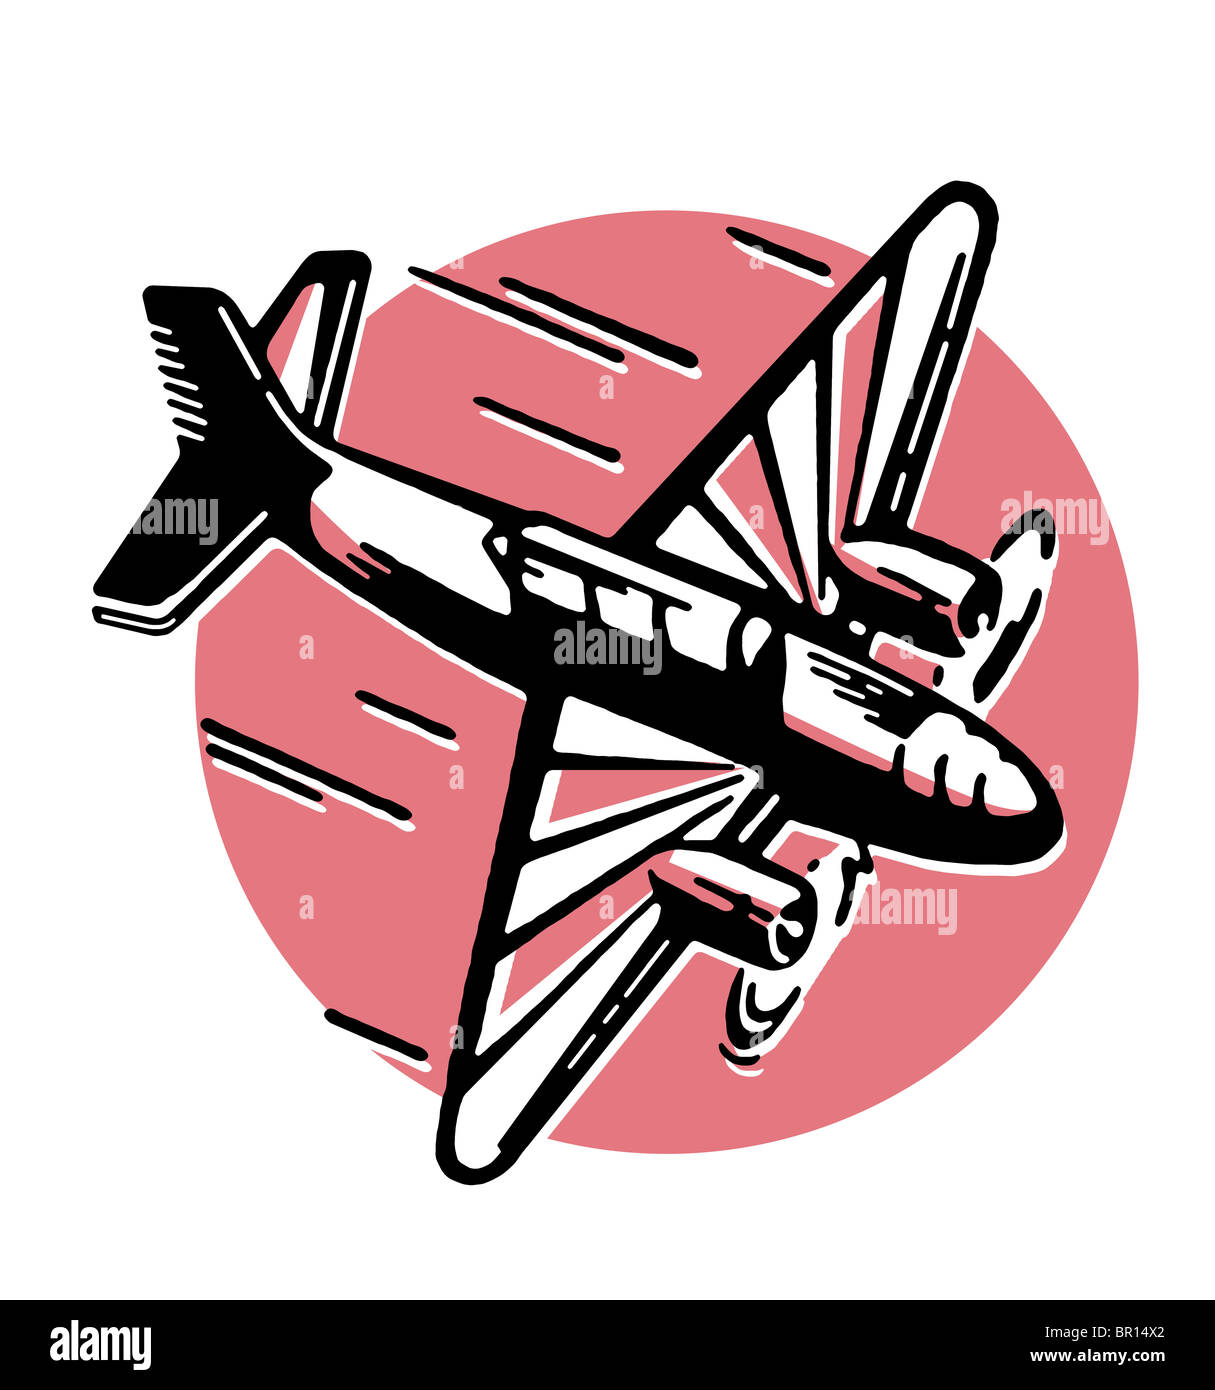 A vintage illustration of an airplane Stock Photo